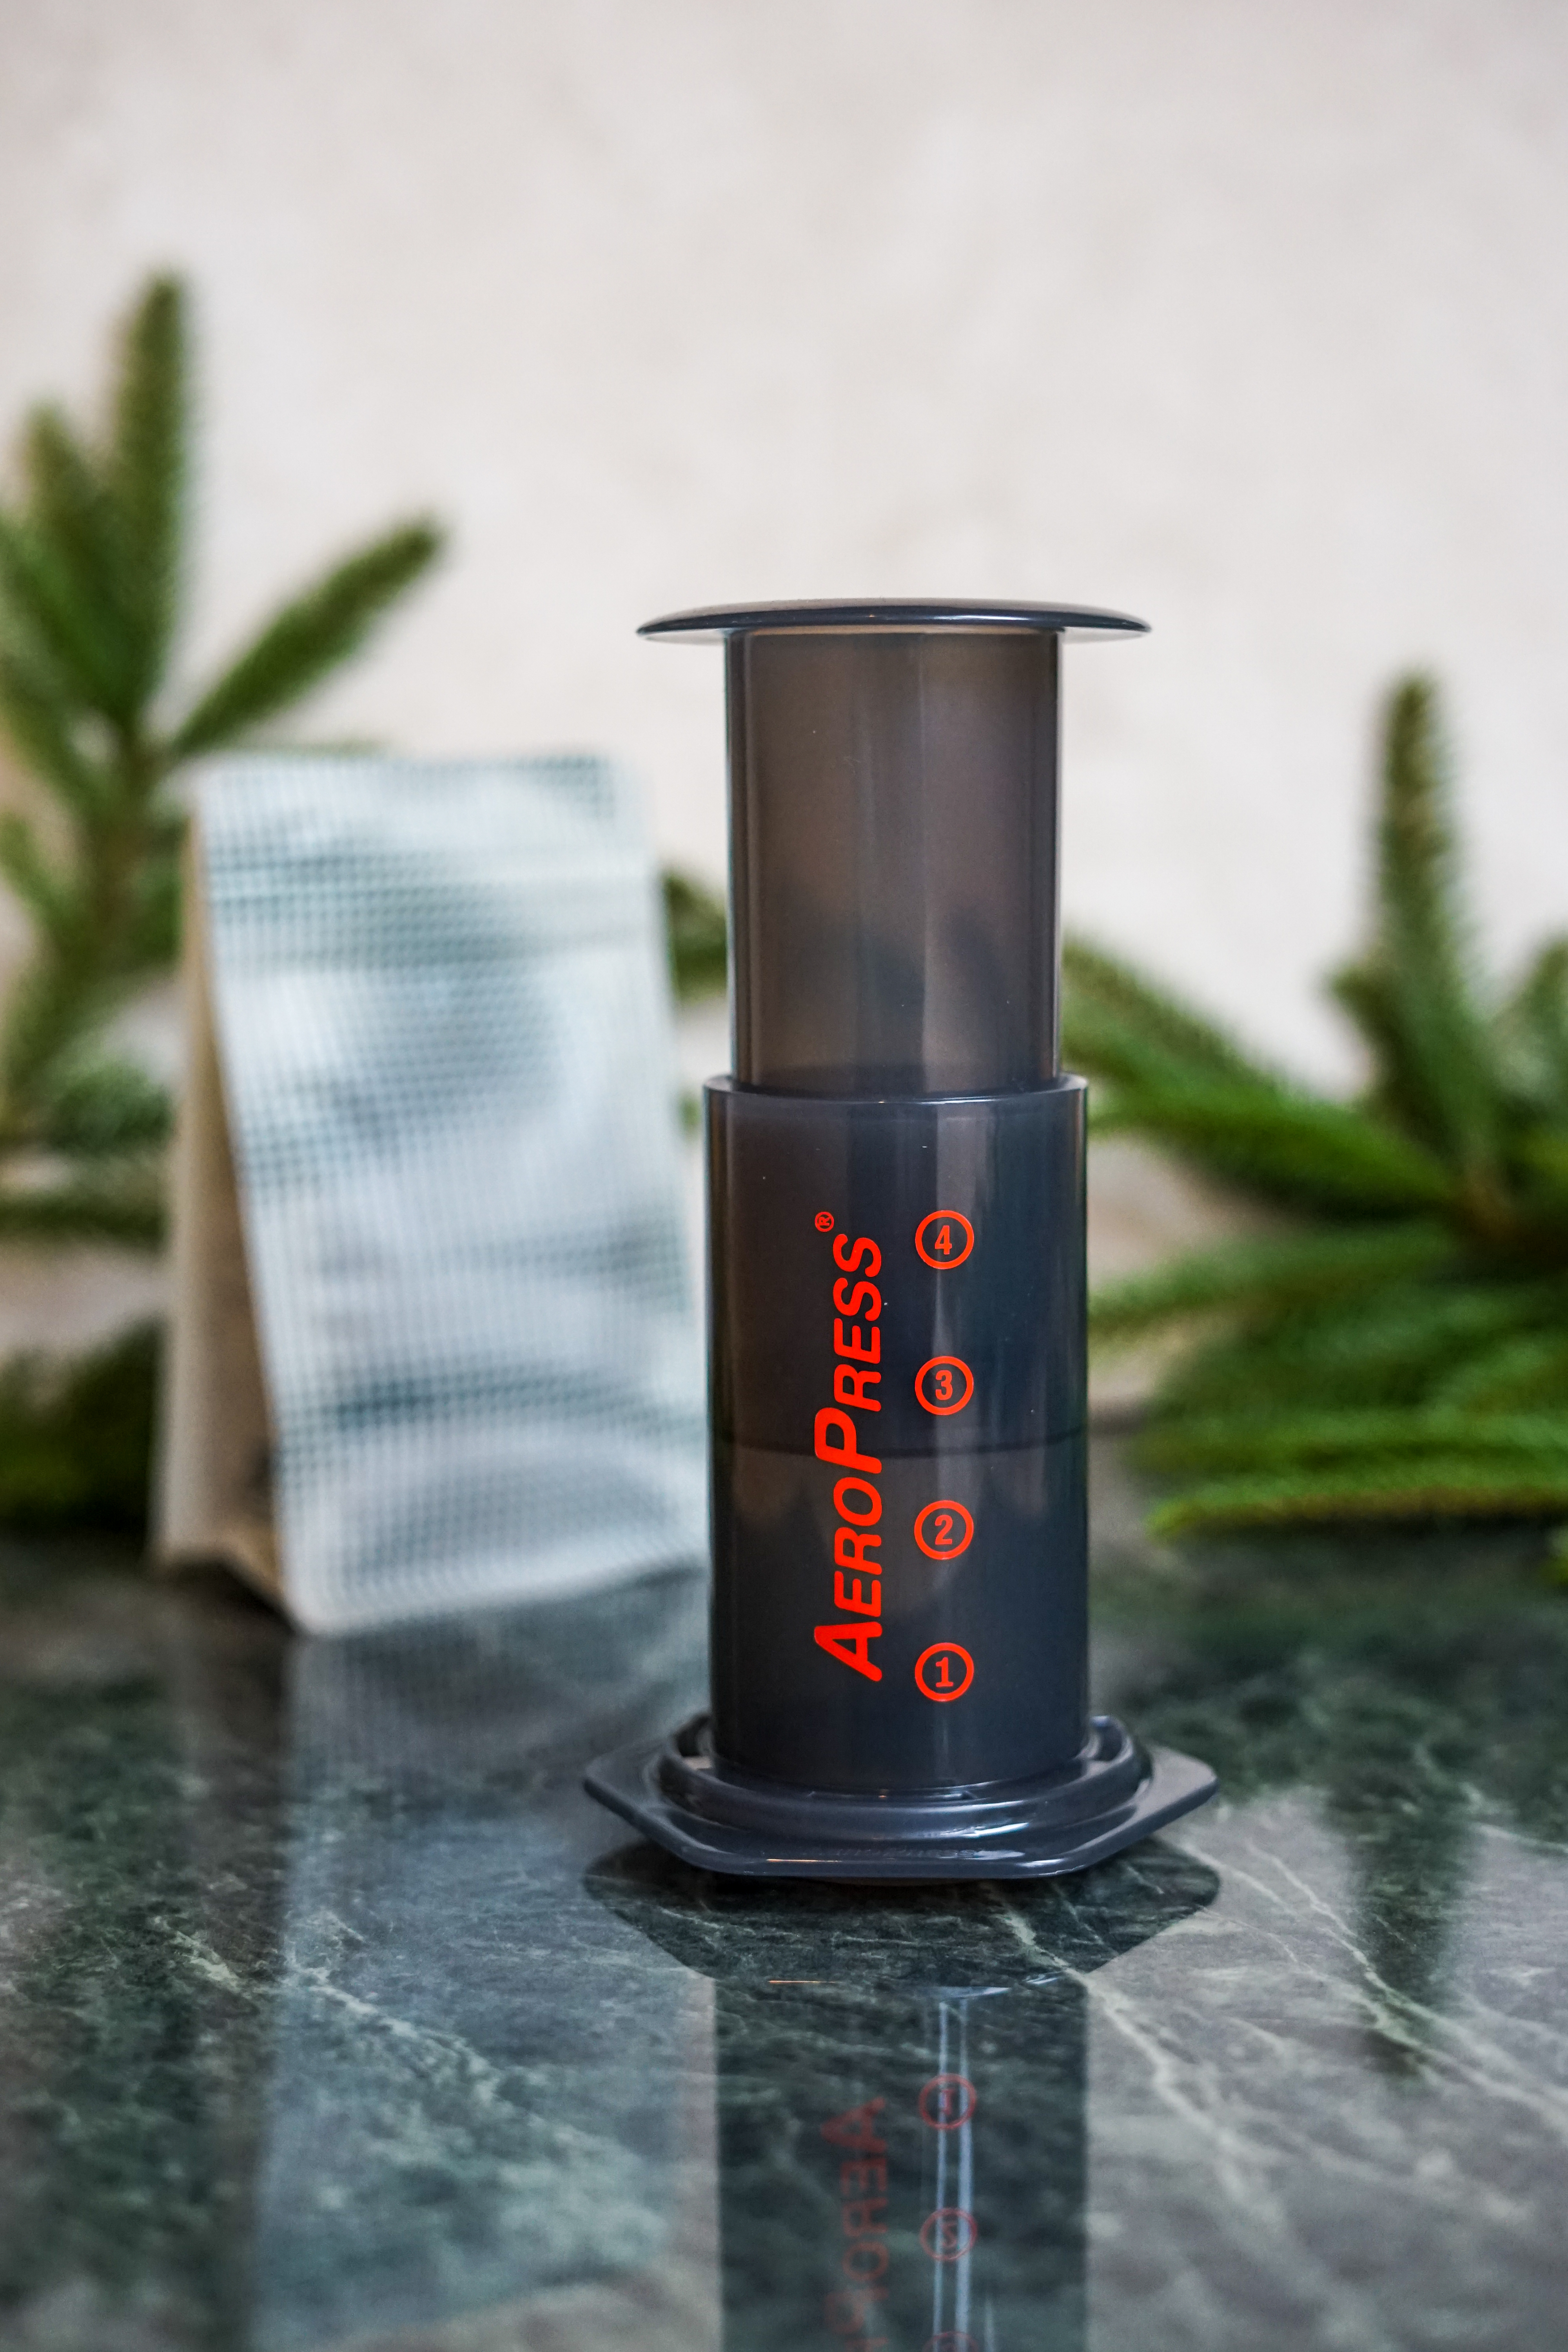 The AeroPress Package